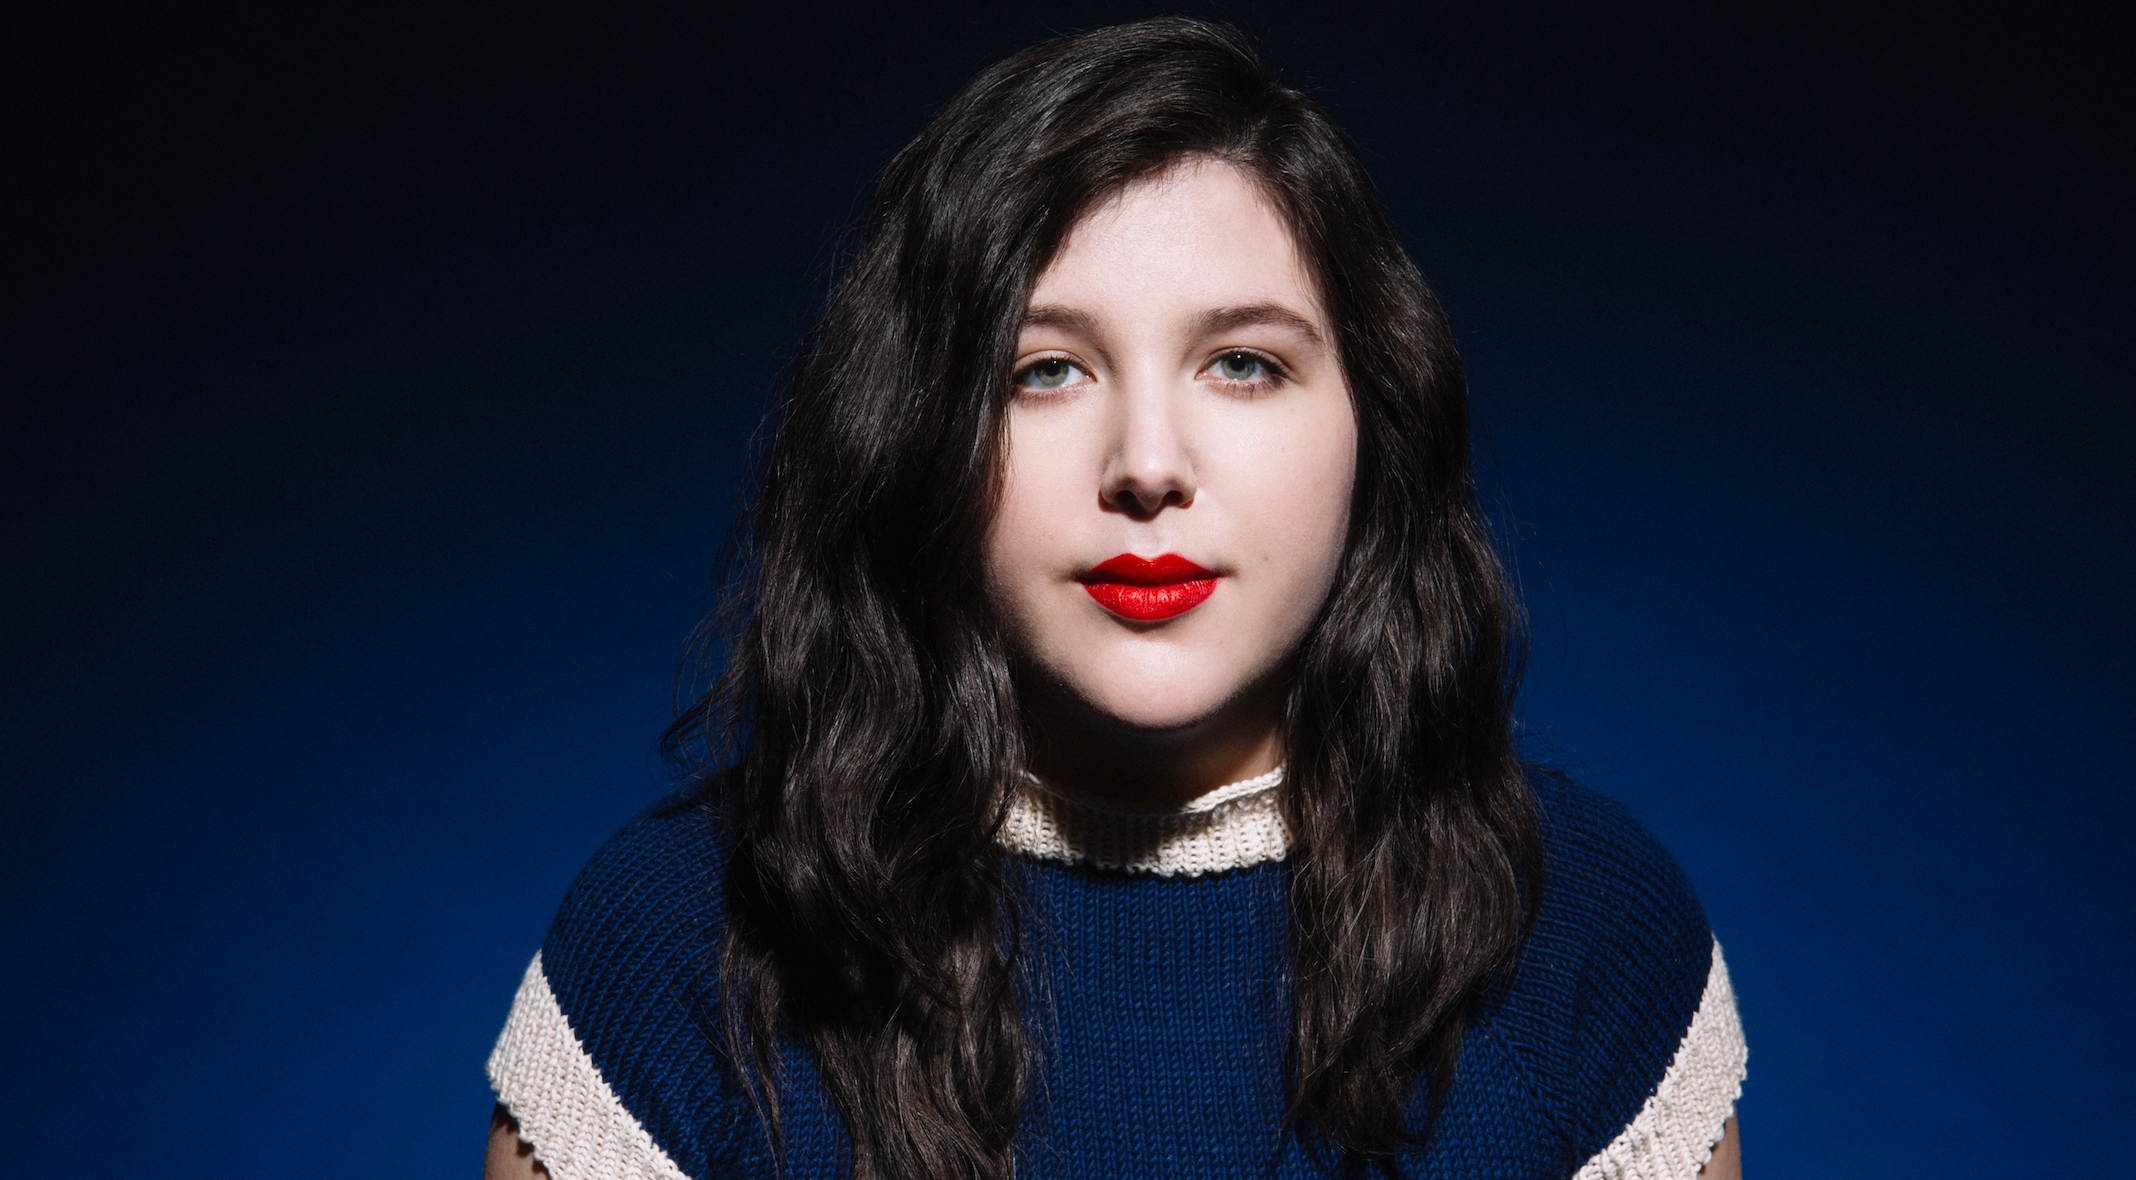 Lucy Dacus Home Video review